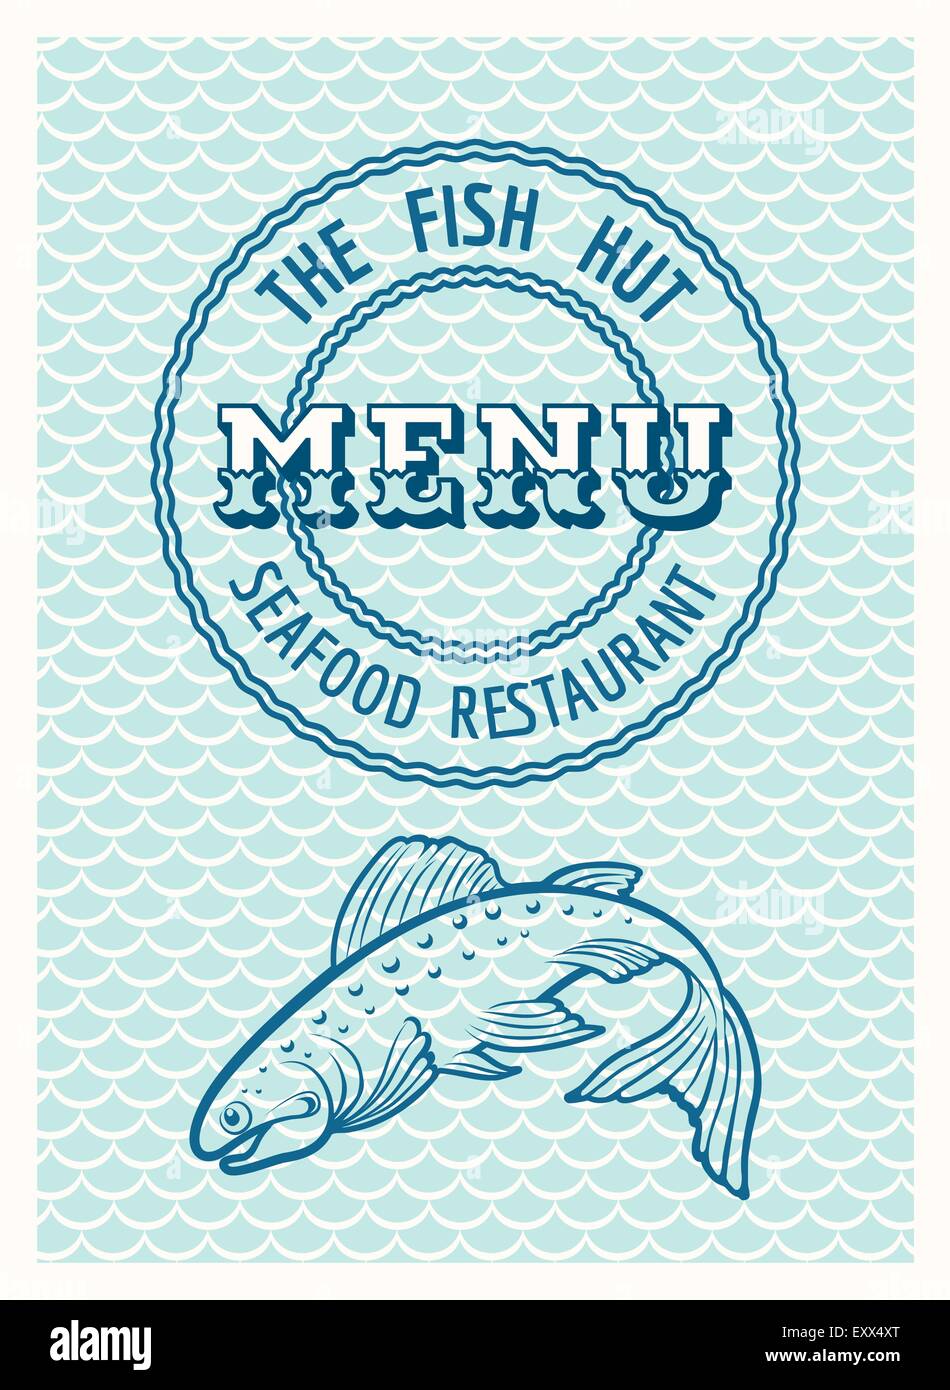 Vintage SeaFood restaurant poster or menu template. Only free font Ewert and Economica used. No gradients. Stock Vector